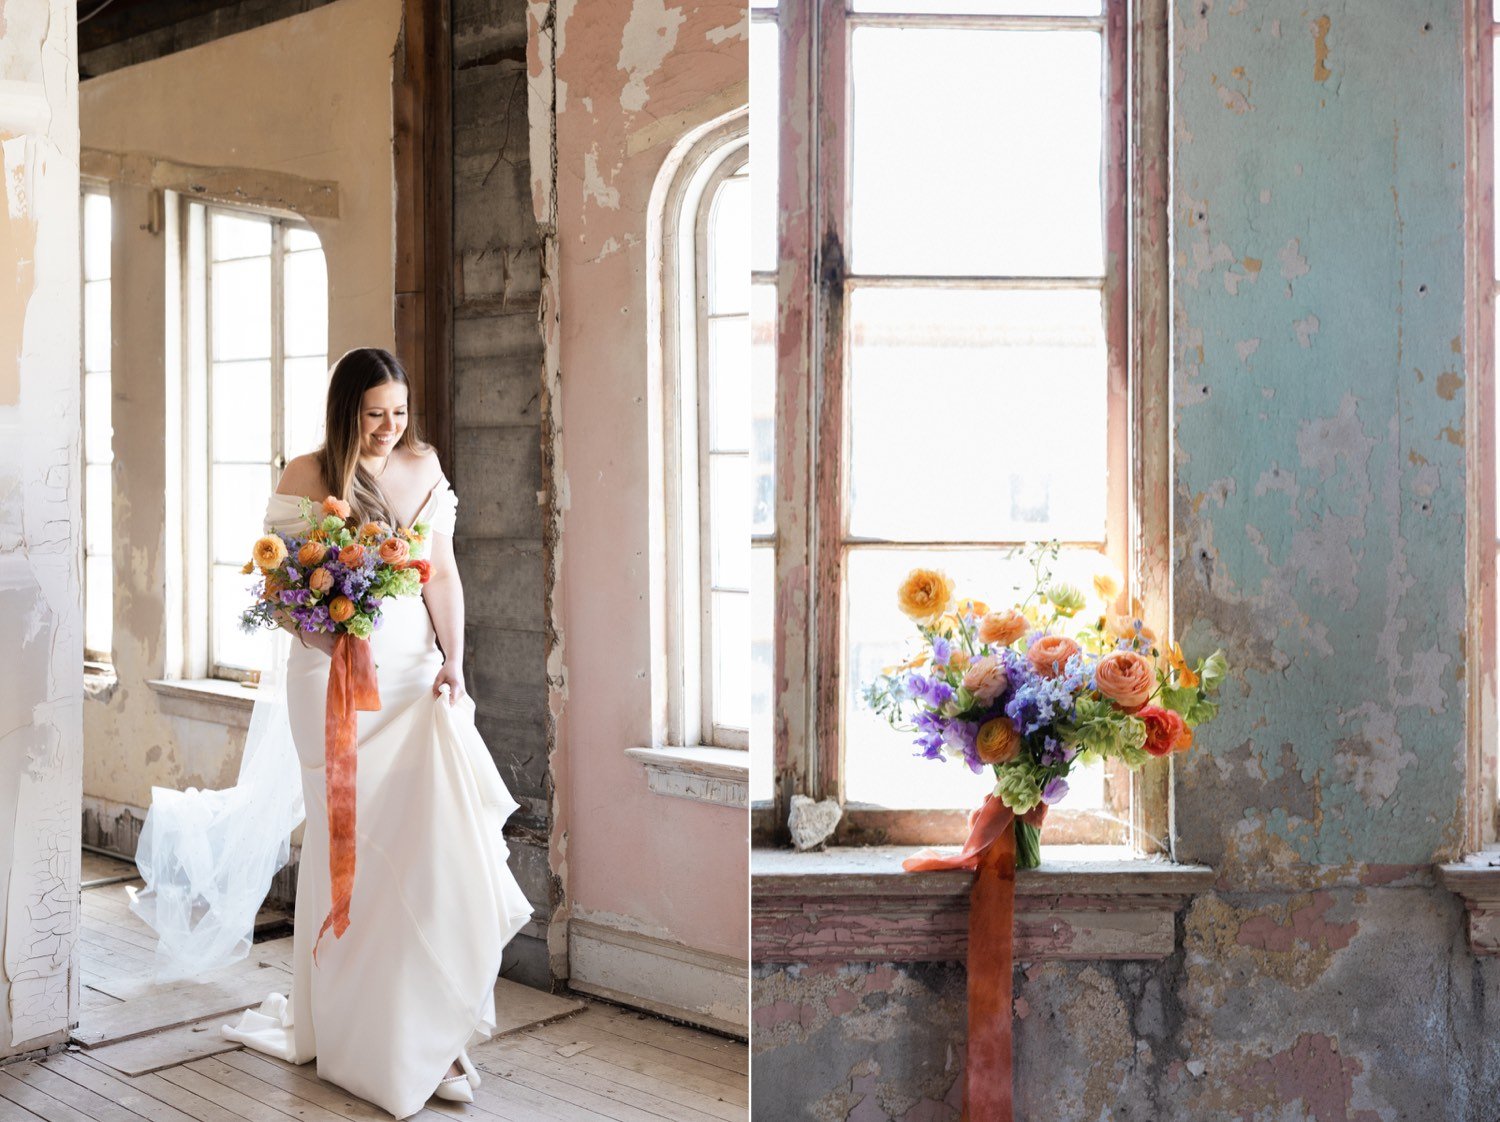 ruins at the astor astoria wedding-27_ruins at the astor astoria wedding-28_bridal bouquet with colorful flowers sits on window sill_bride holds dress and bouquet of colorful flowers while walking.jpg